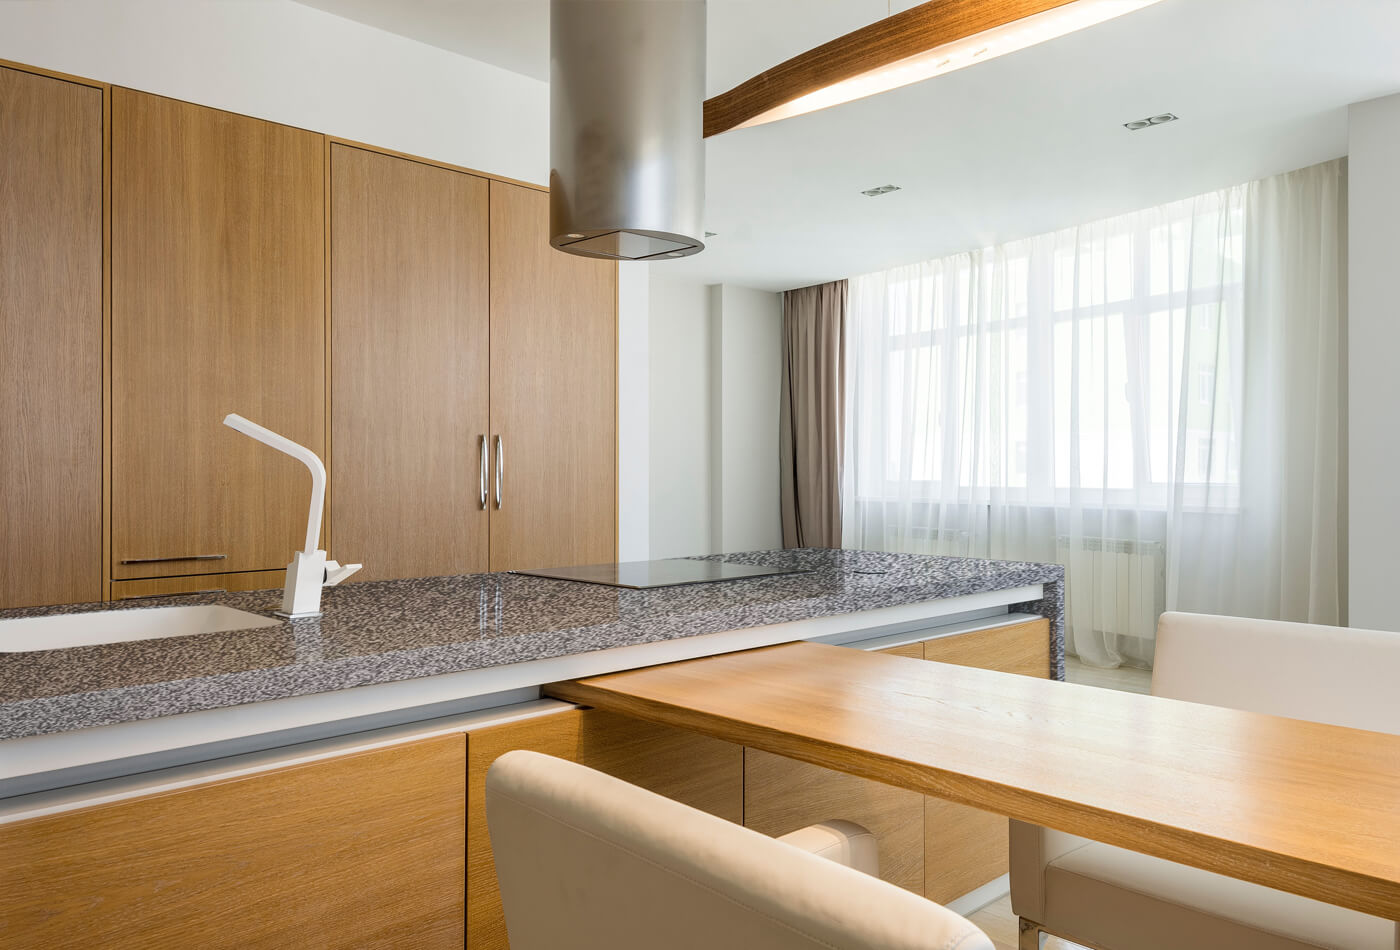 Why Choose Vale Nevado Granite For Your Kitchen Renovation